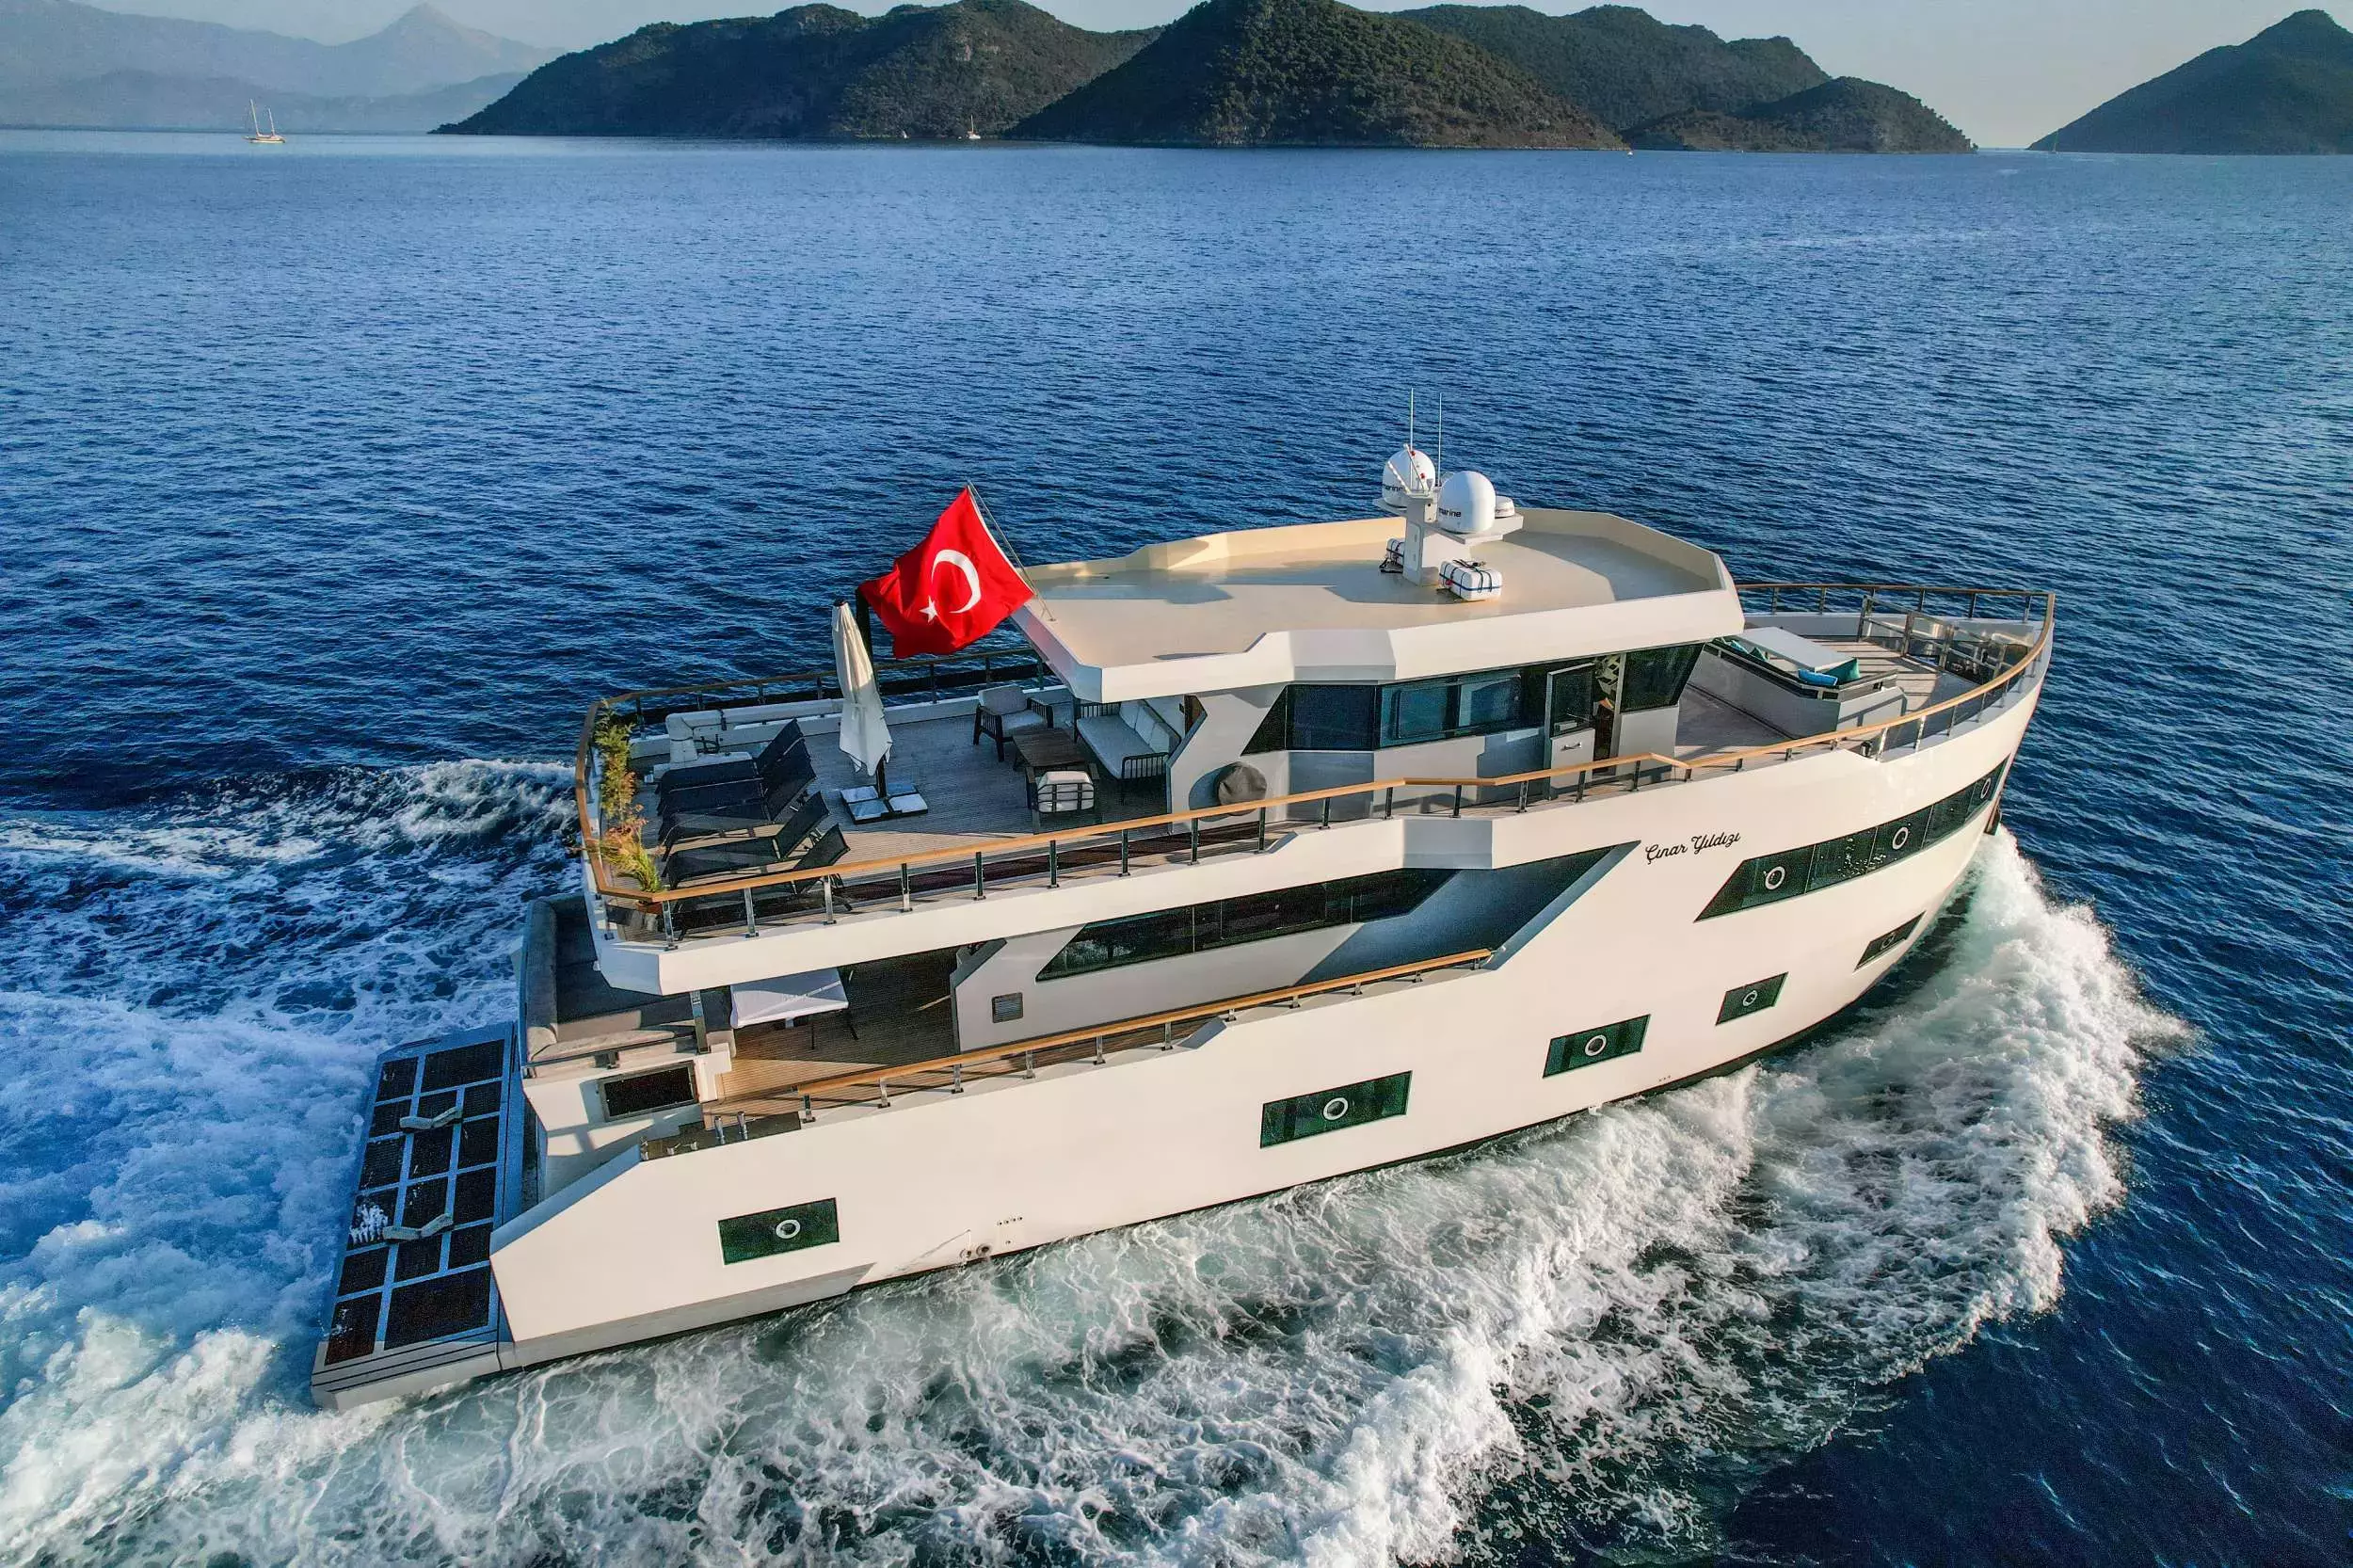 Cinar Yildizi by Custom Made - Top rates for a Charter of a private Motor Yacht in Maldives